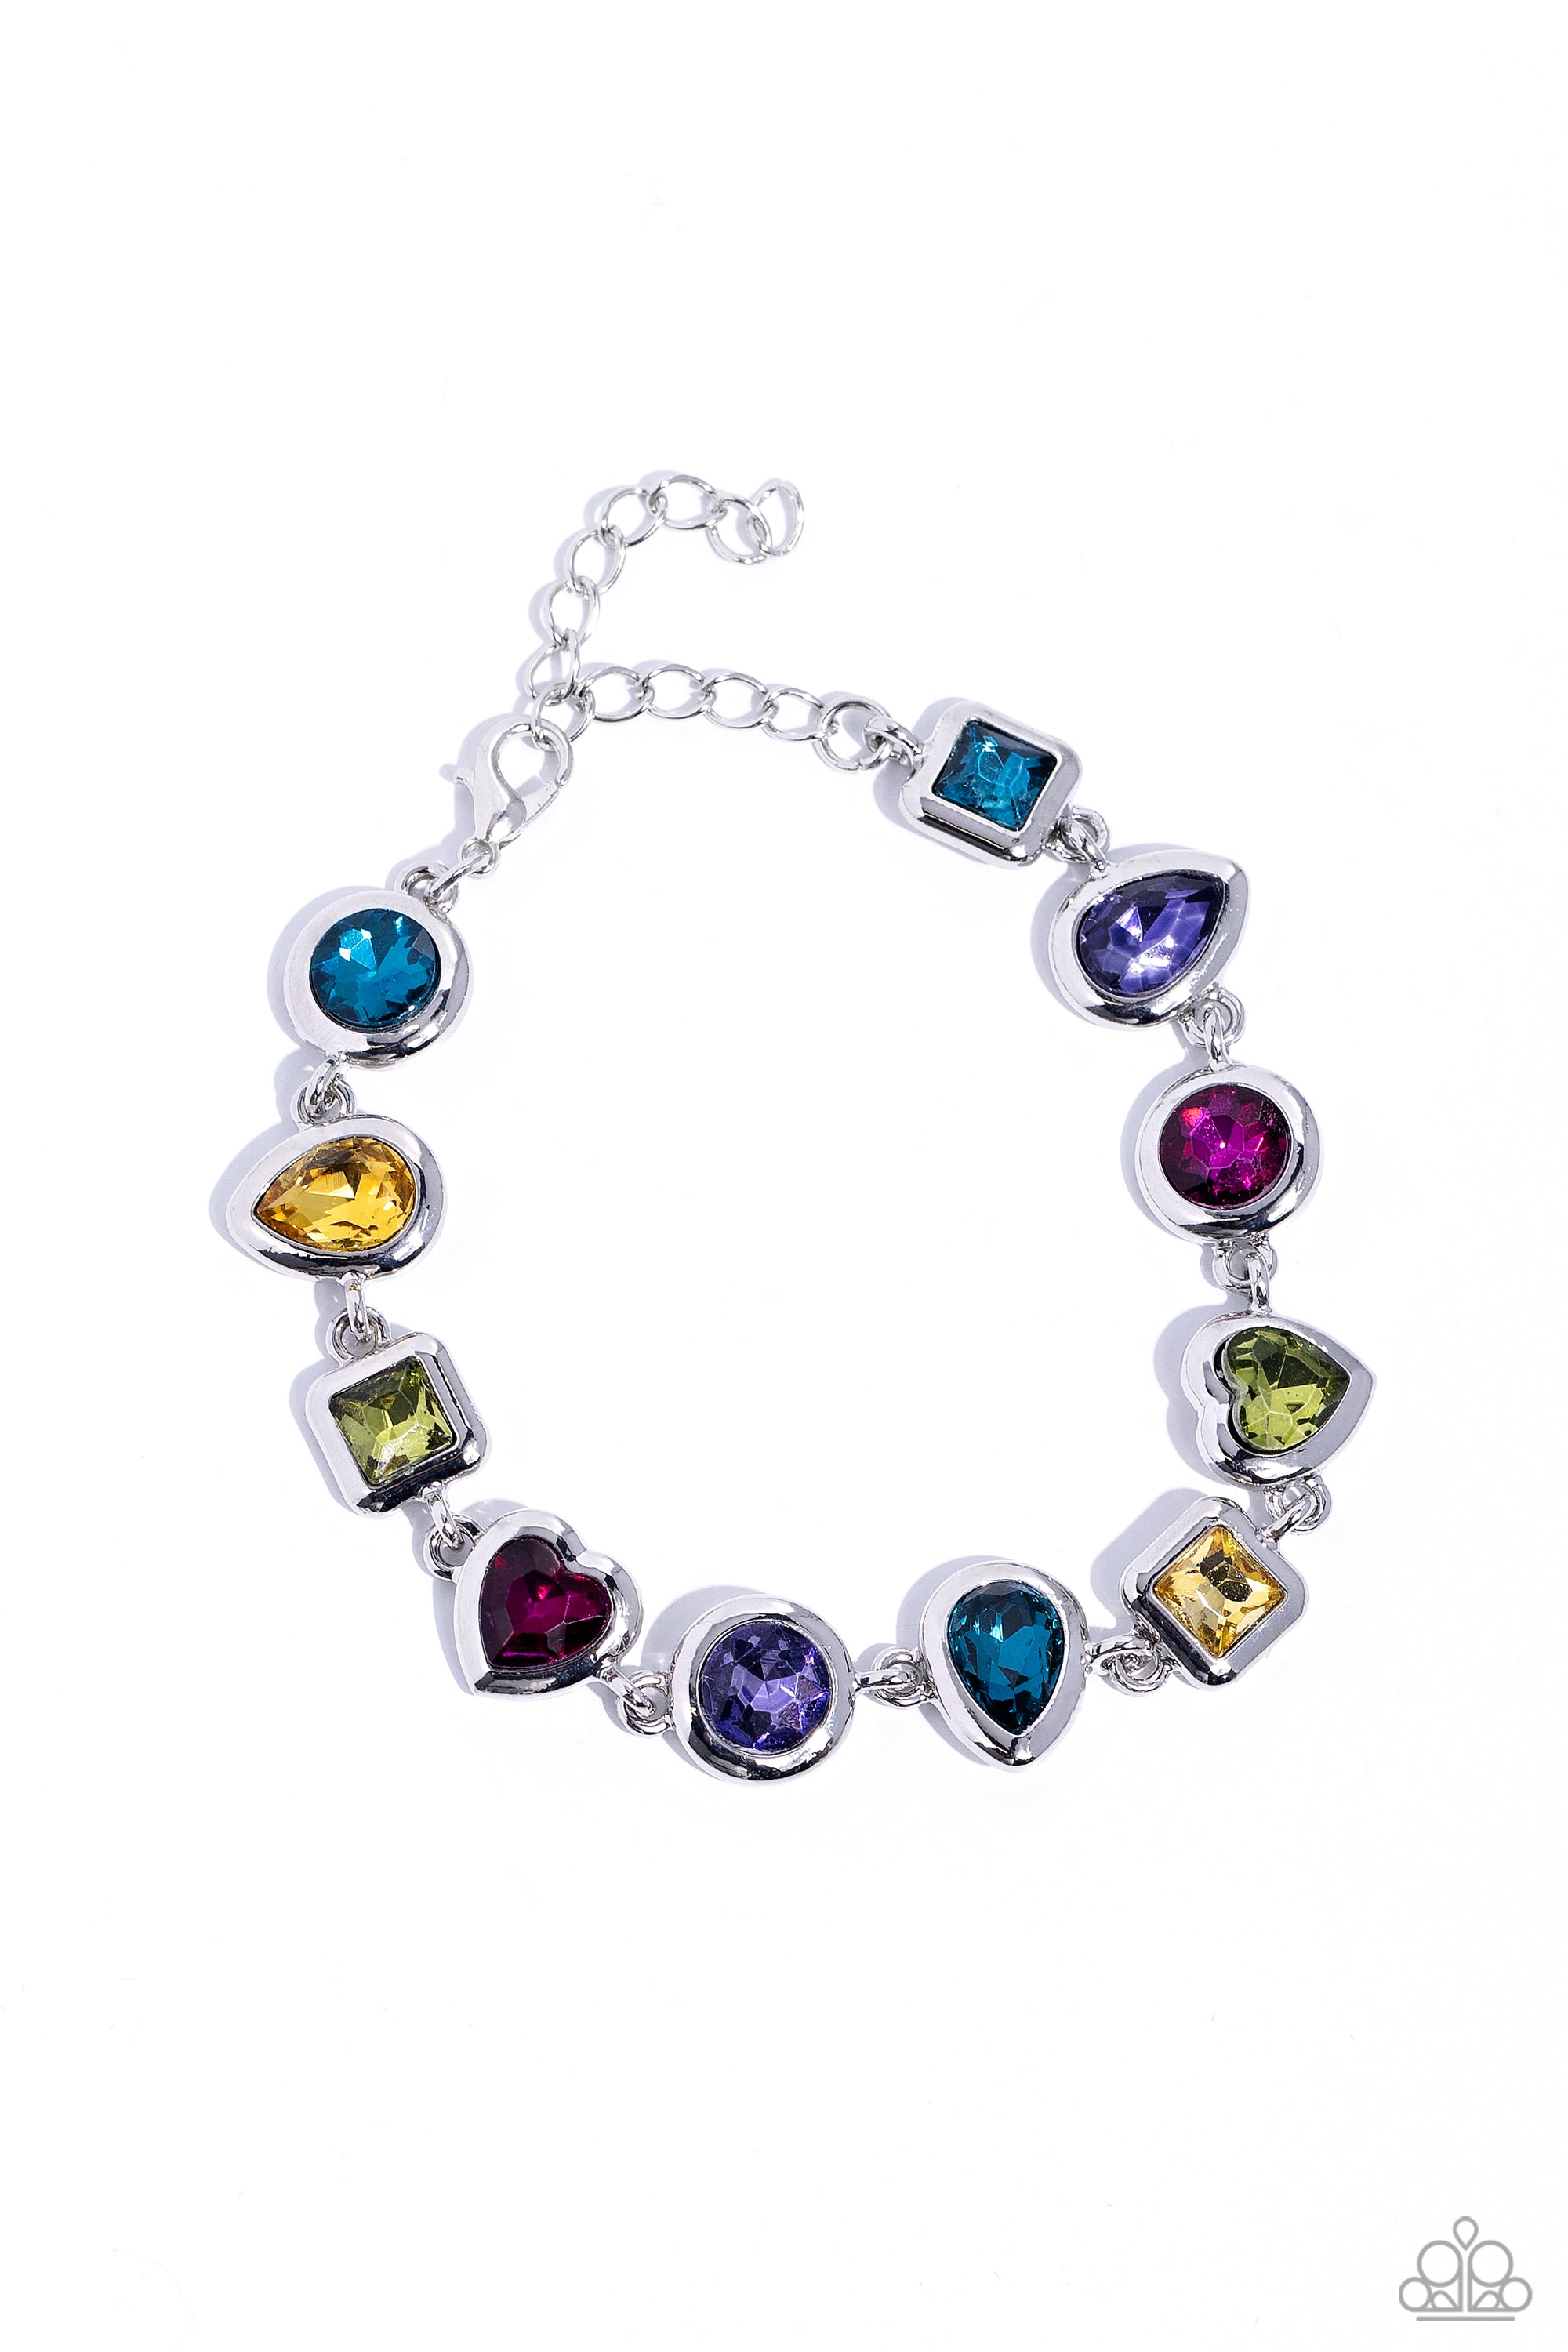 Actively Abstract Multi Rhinestone Bracelet - Paparazzi Accessories- lightbox - CarasShop.com - $5 Jewelry by Cara Jewels